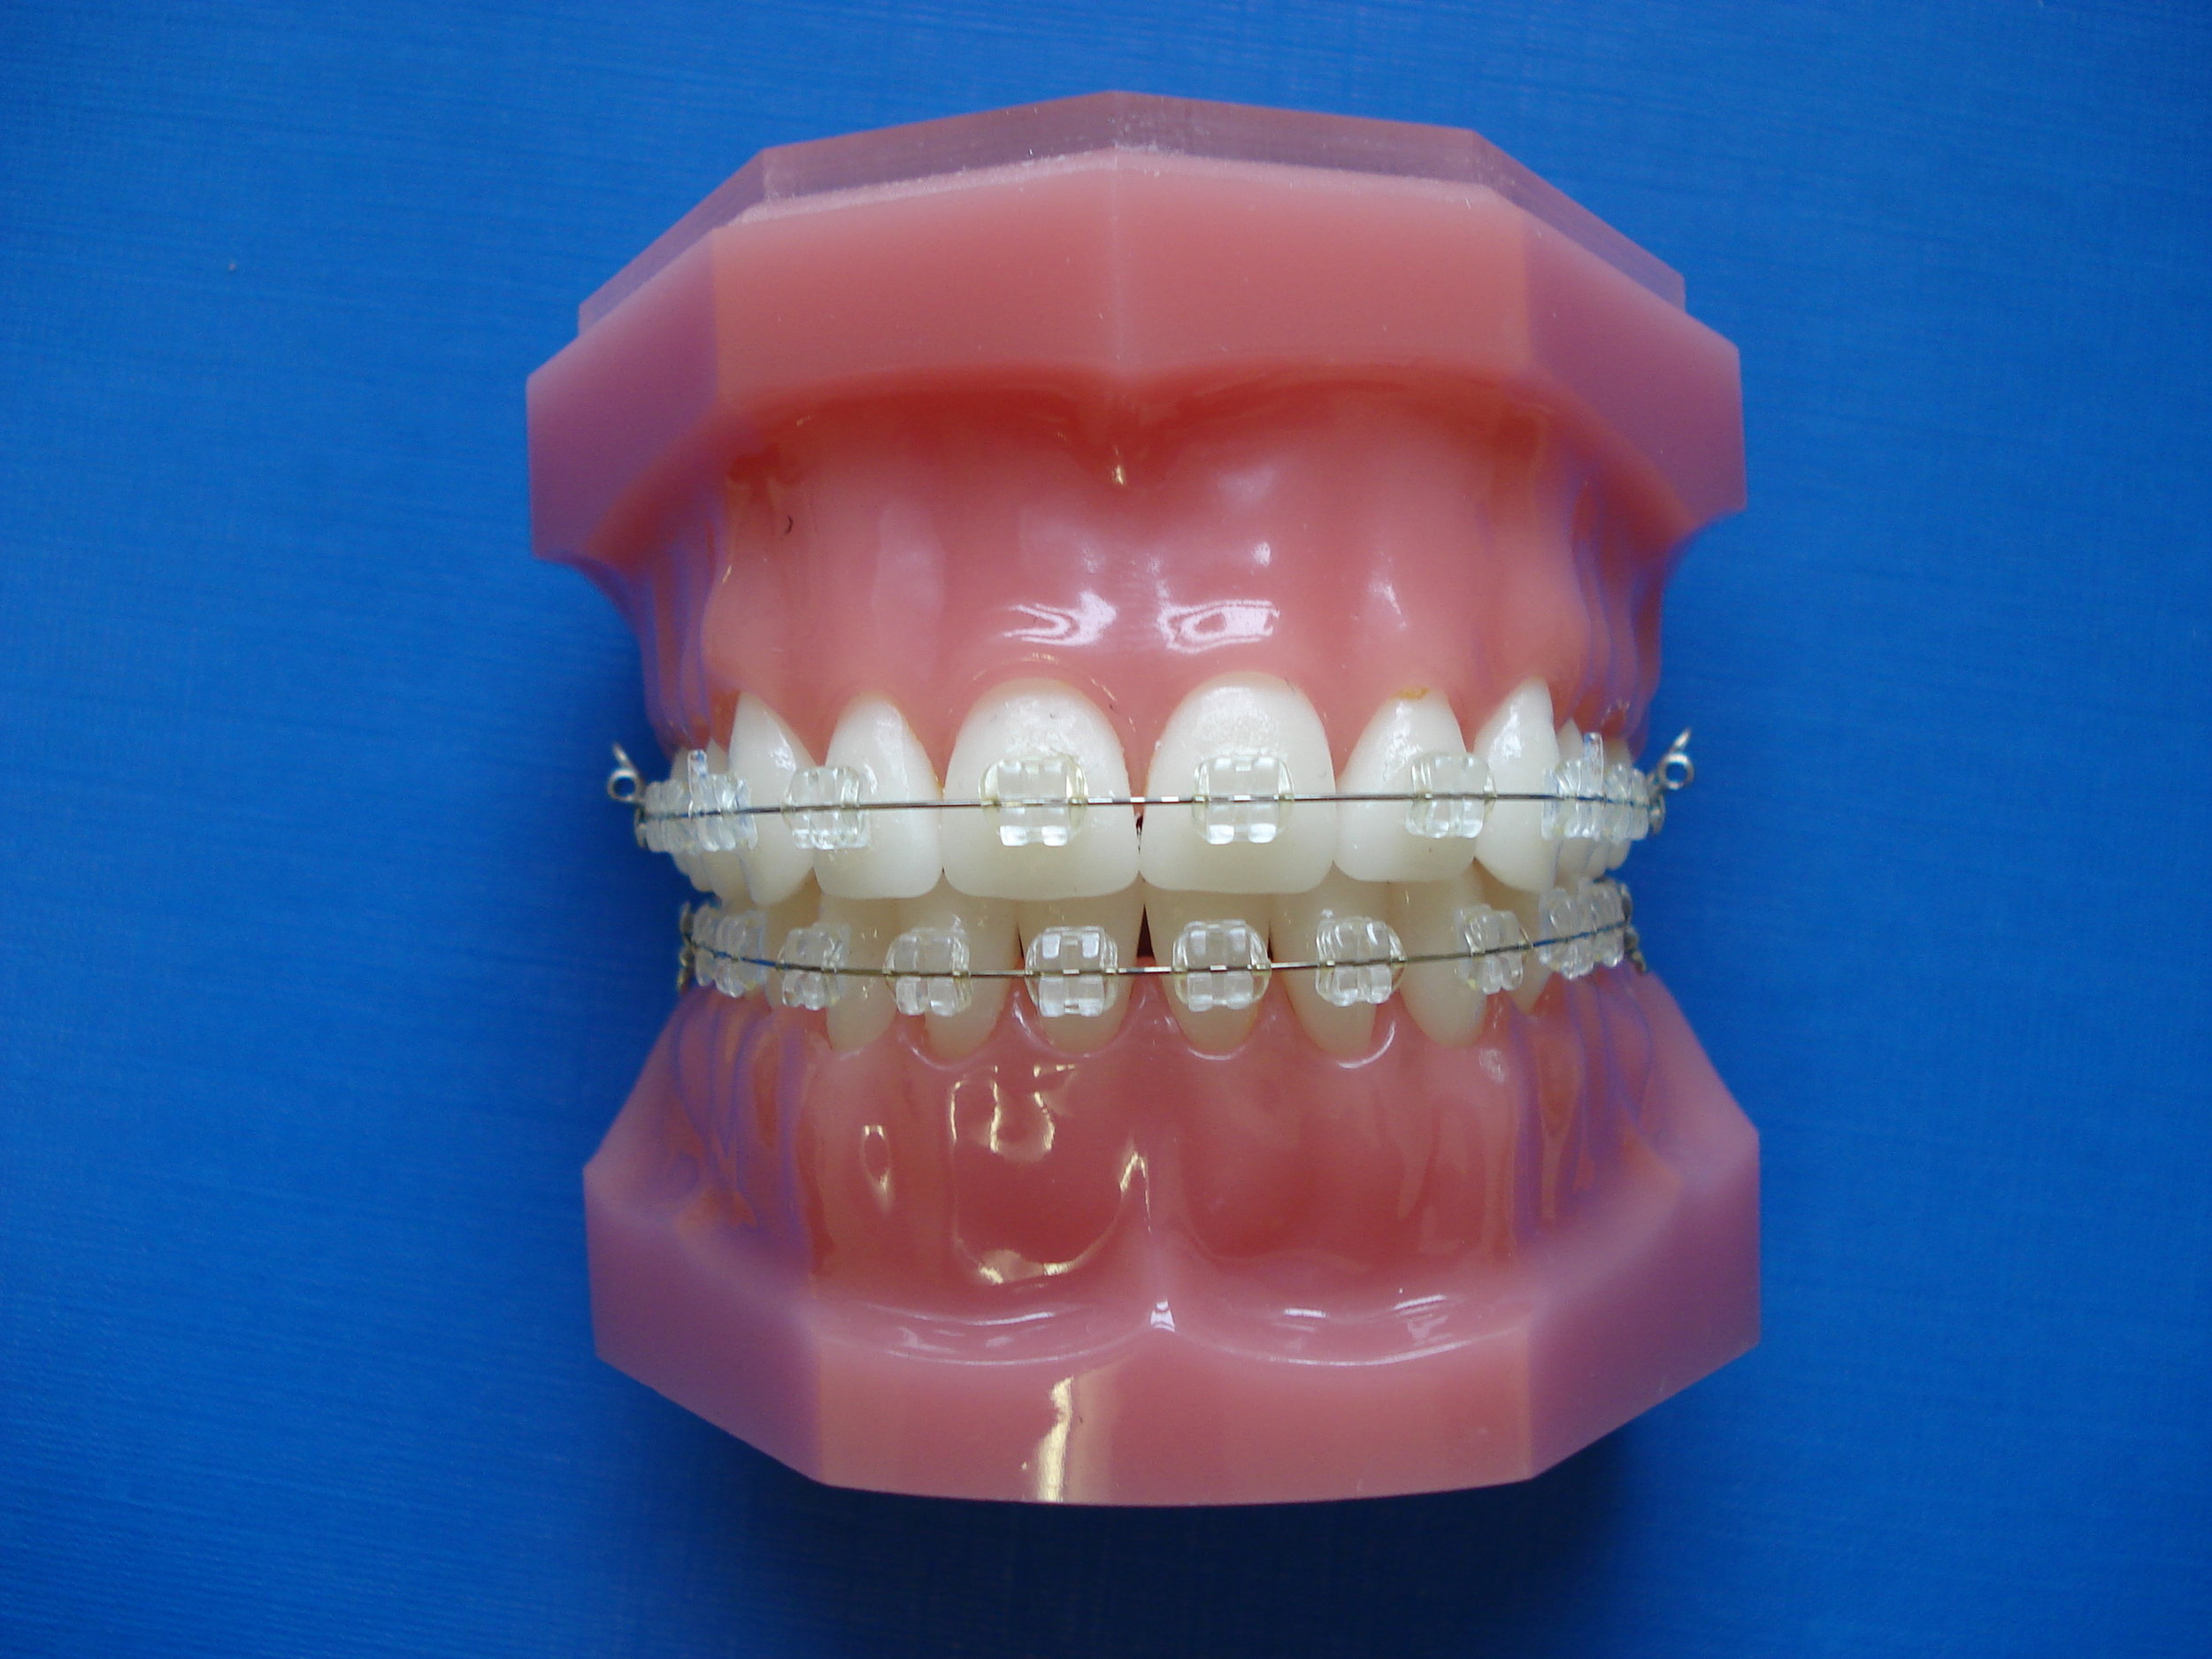 Clarity Ceramic Braces from 3M are available at Brace Club in Guildford, Surrey.